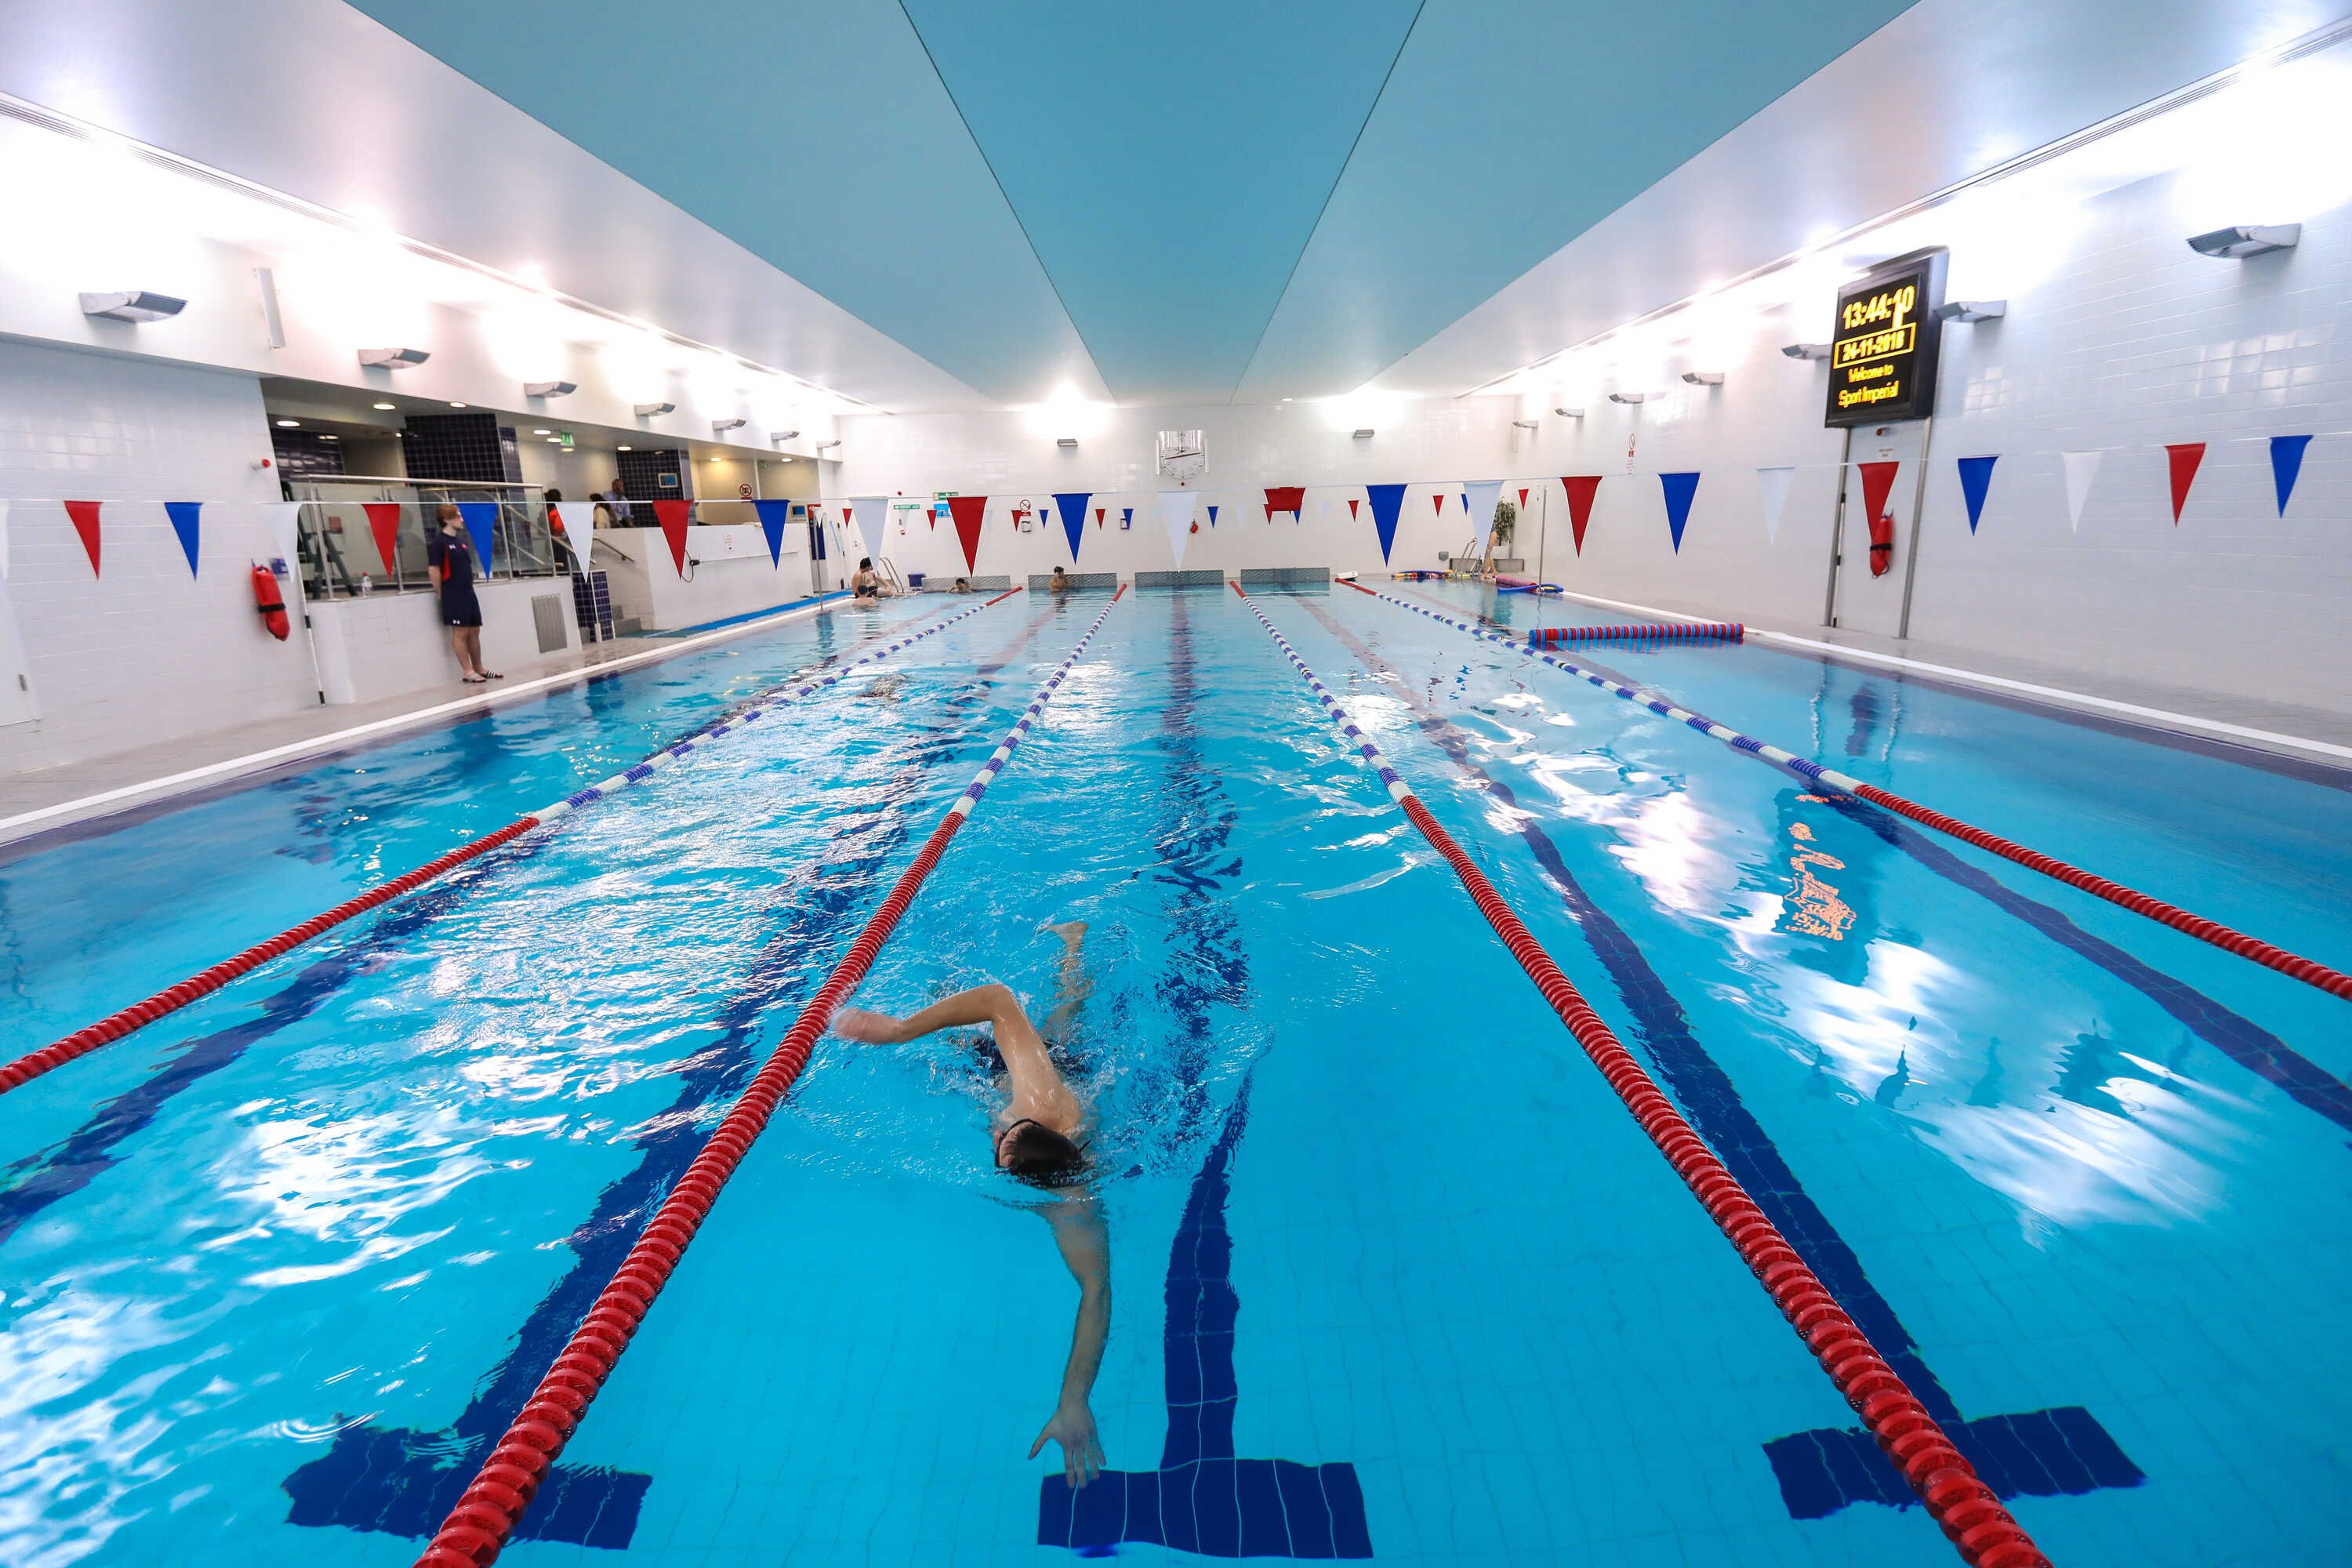 A student swimming in the pool in Ethos Sports Centre